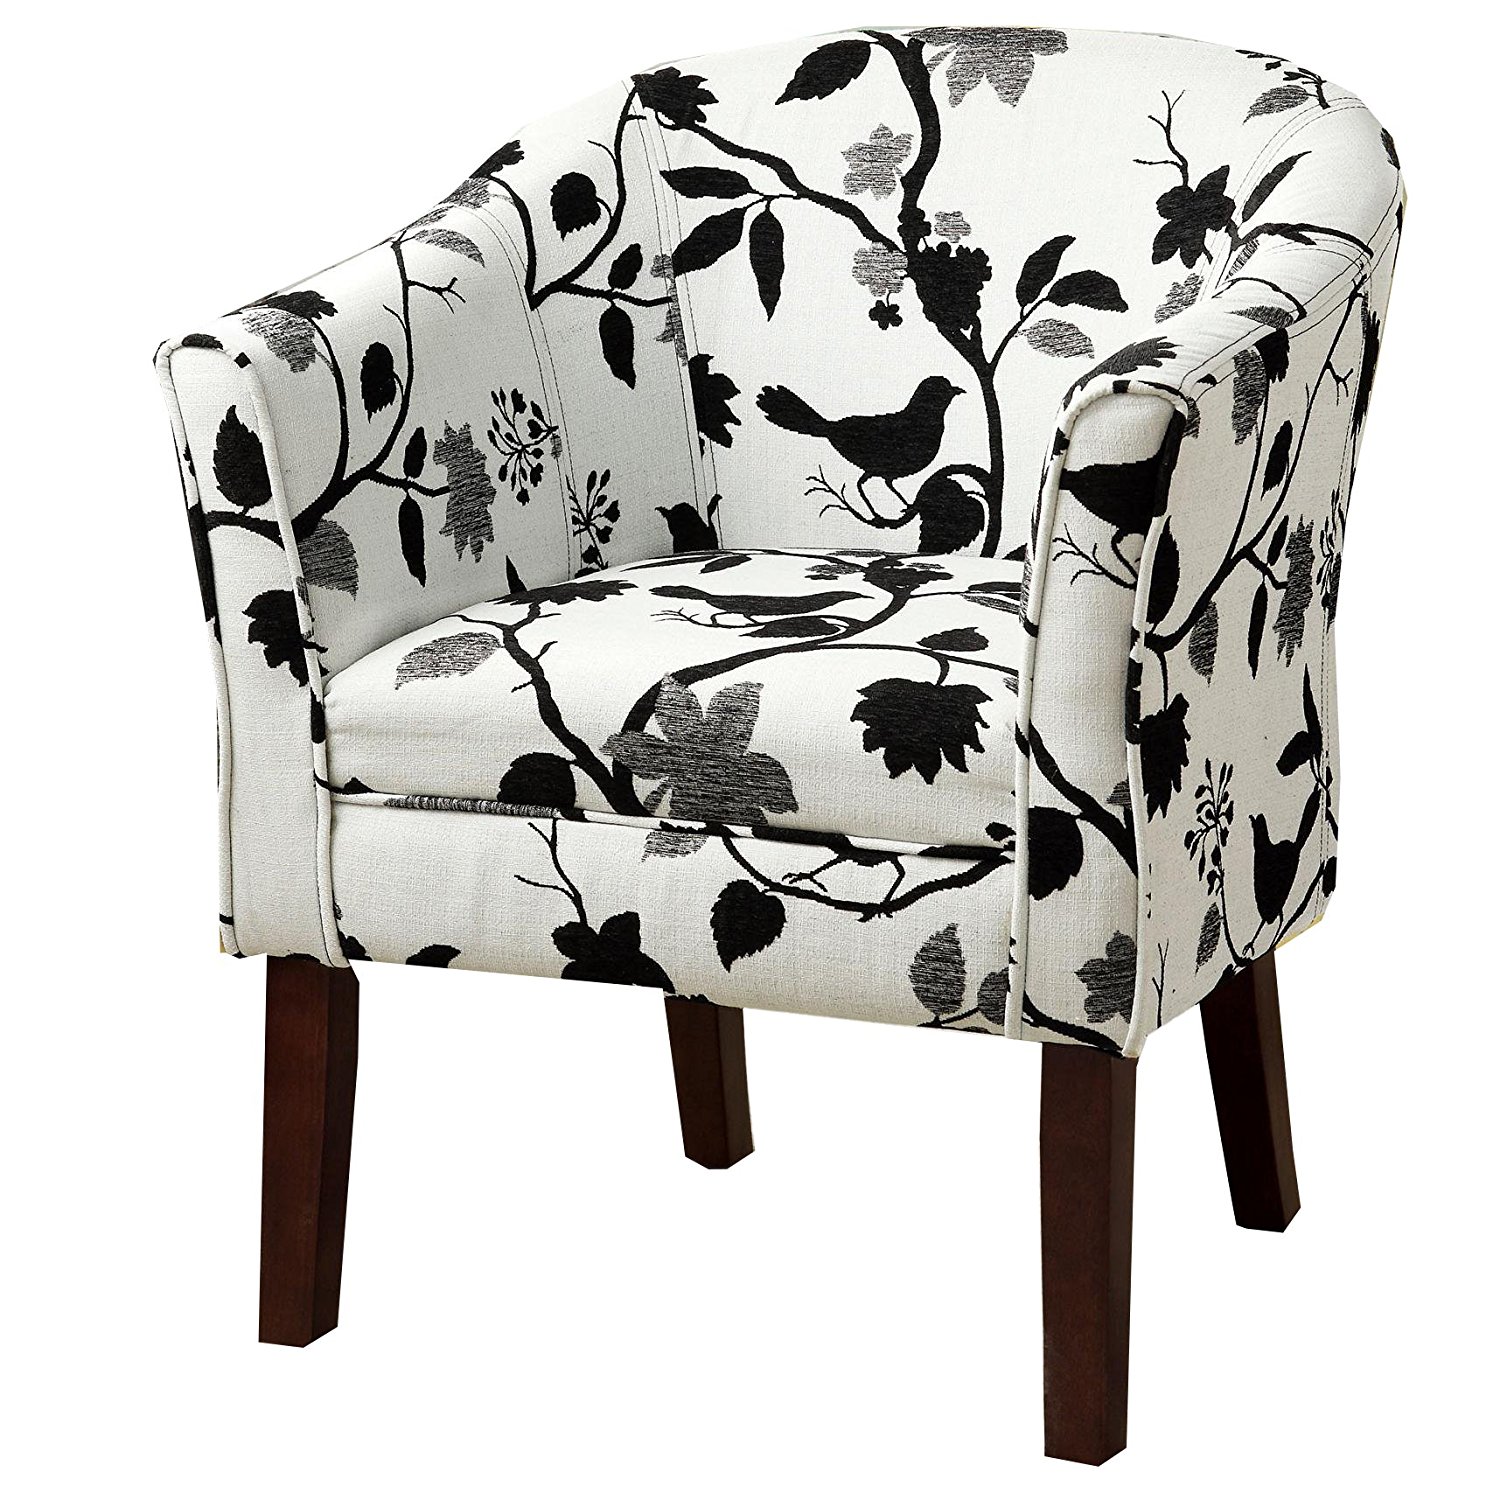 Small Accent Chairs For Living Room - Decor IdeasDecor Ideas